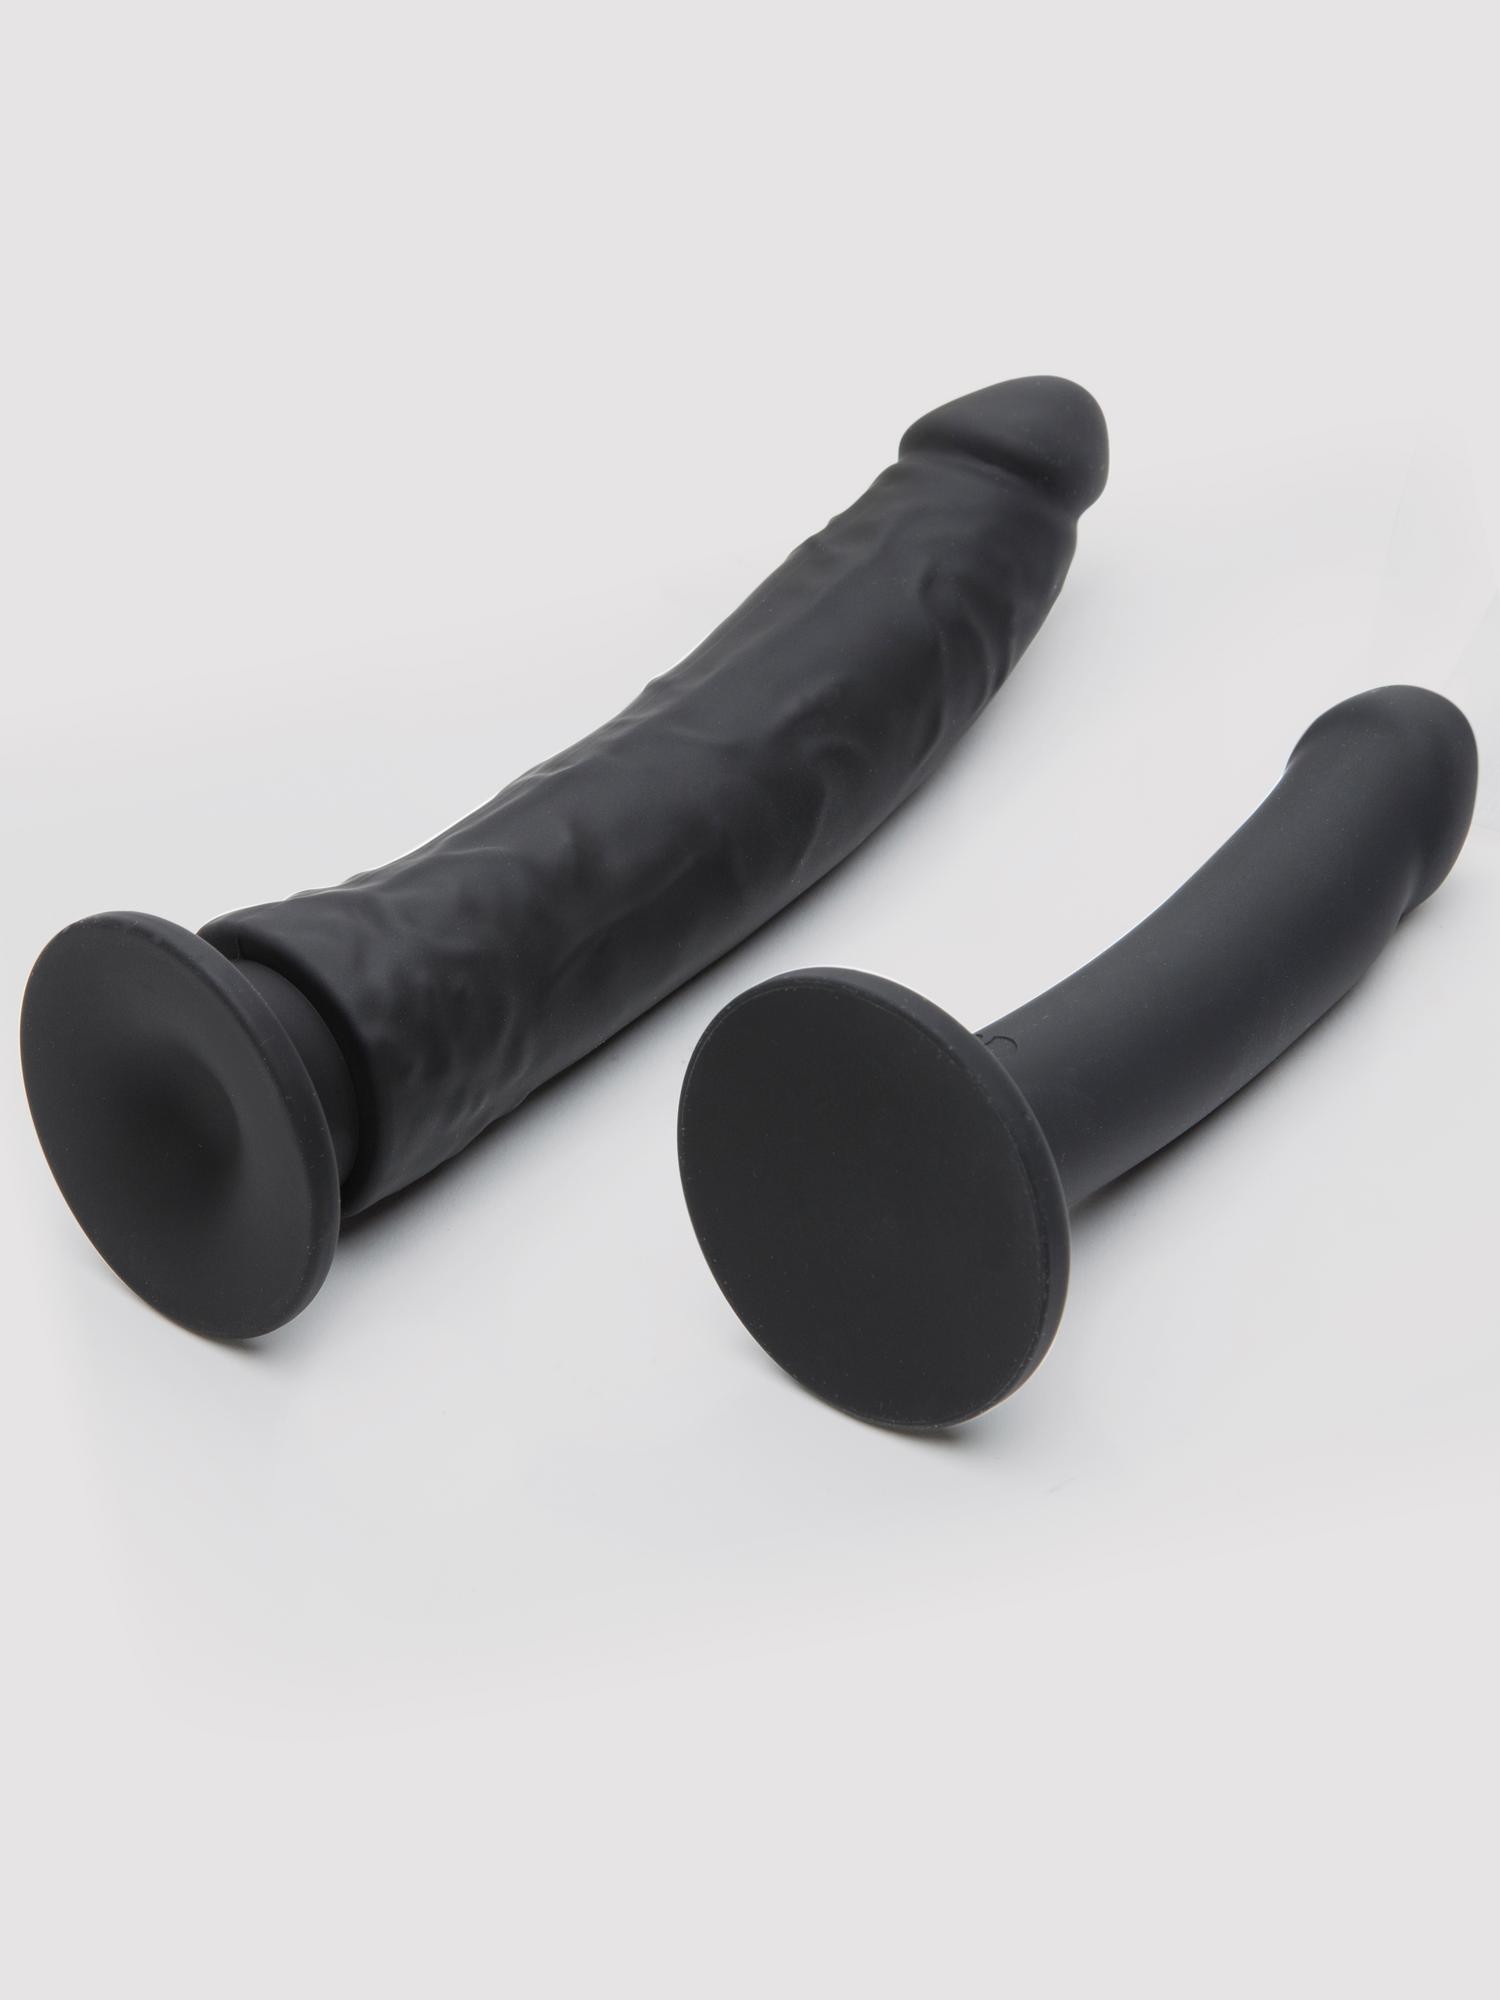  Lovehoney Deluxe Strap-On Harness Kit with 2 Silicone Dildos . Slide 2